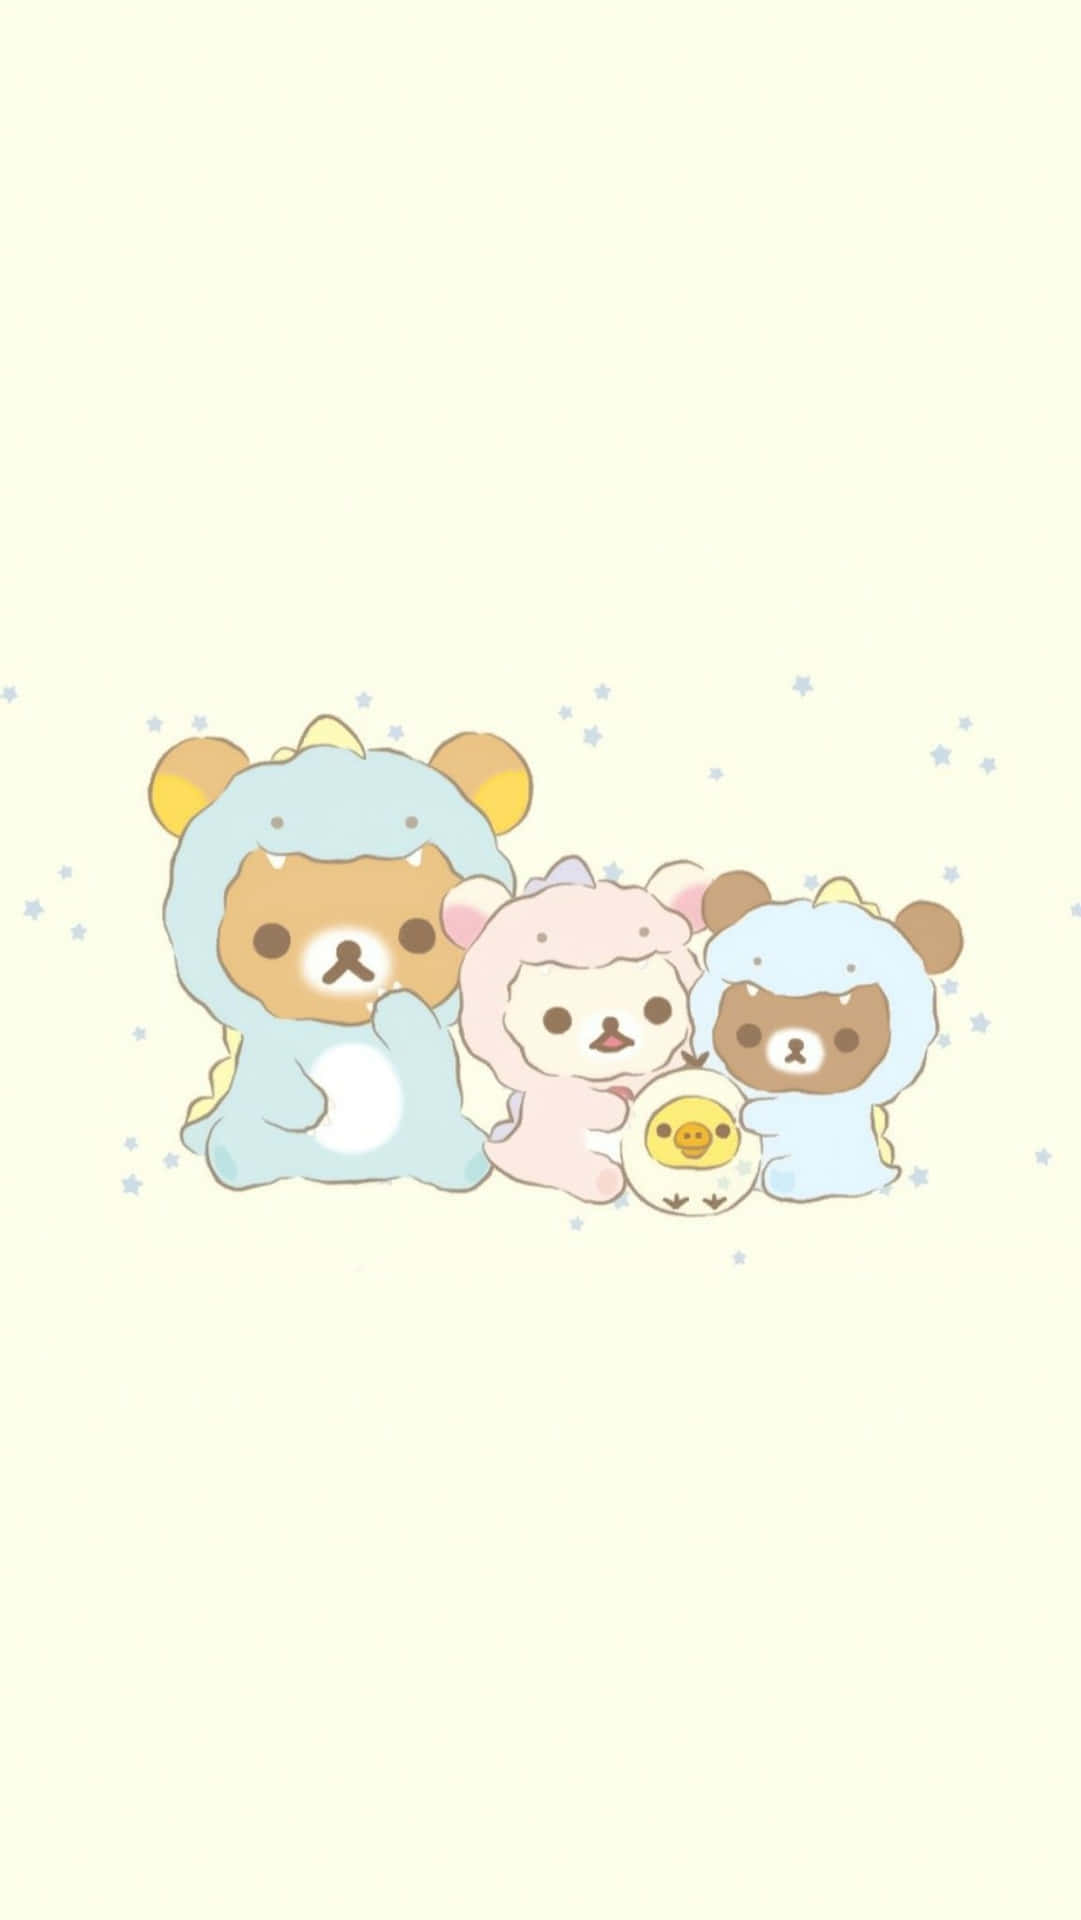 Brighten up your day with some Kawaii Rilakkuma! Wallpaper